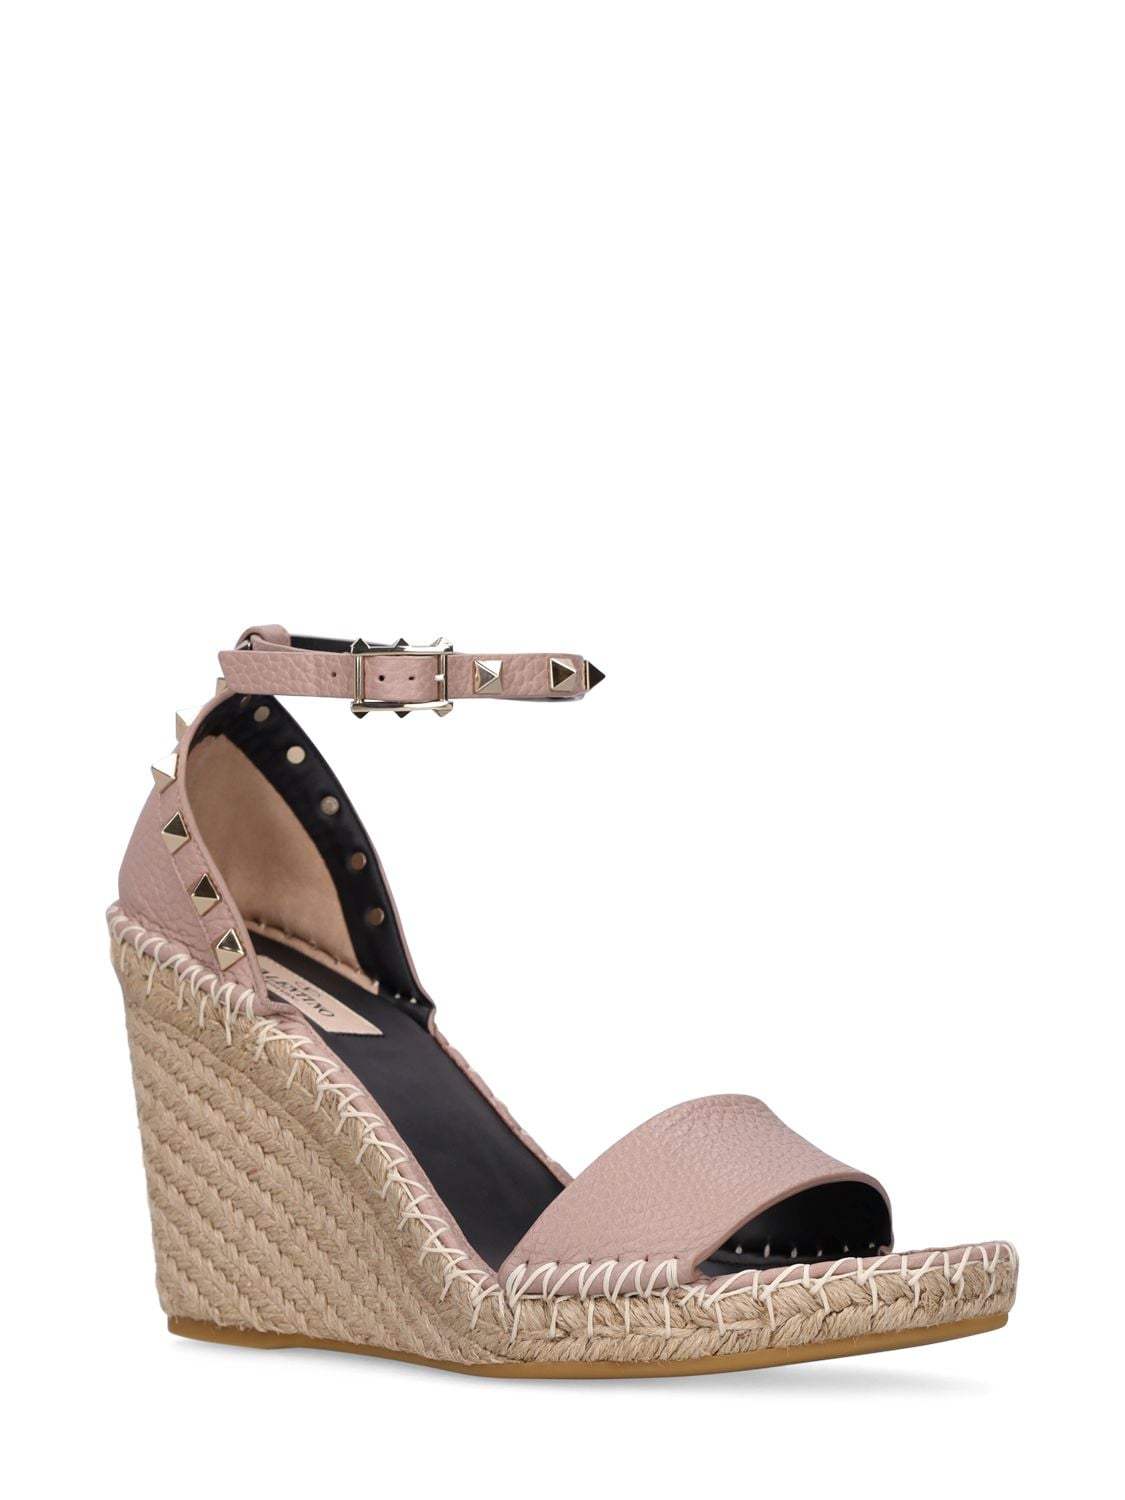 Shop Valentino 105mm Rockstud Leather Wedges In Poudre